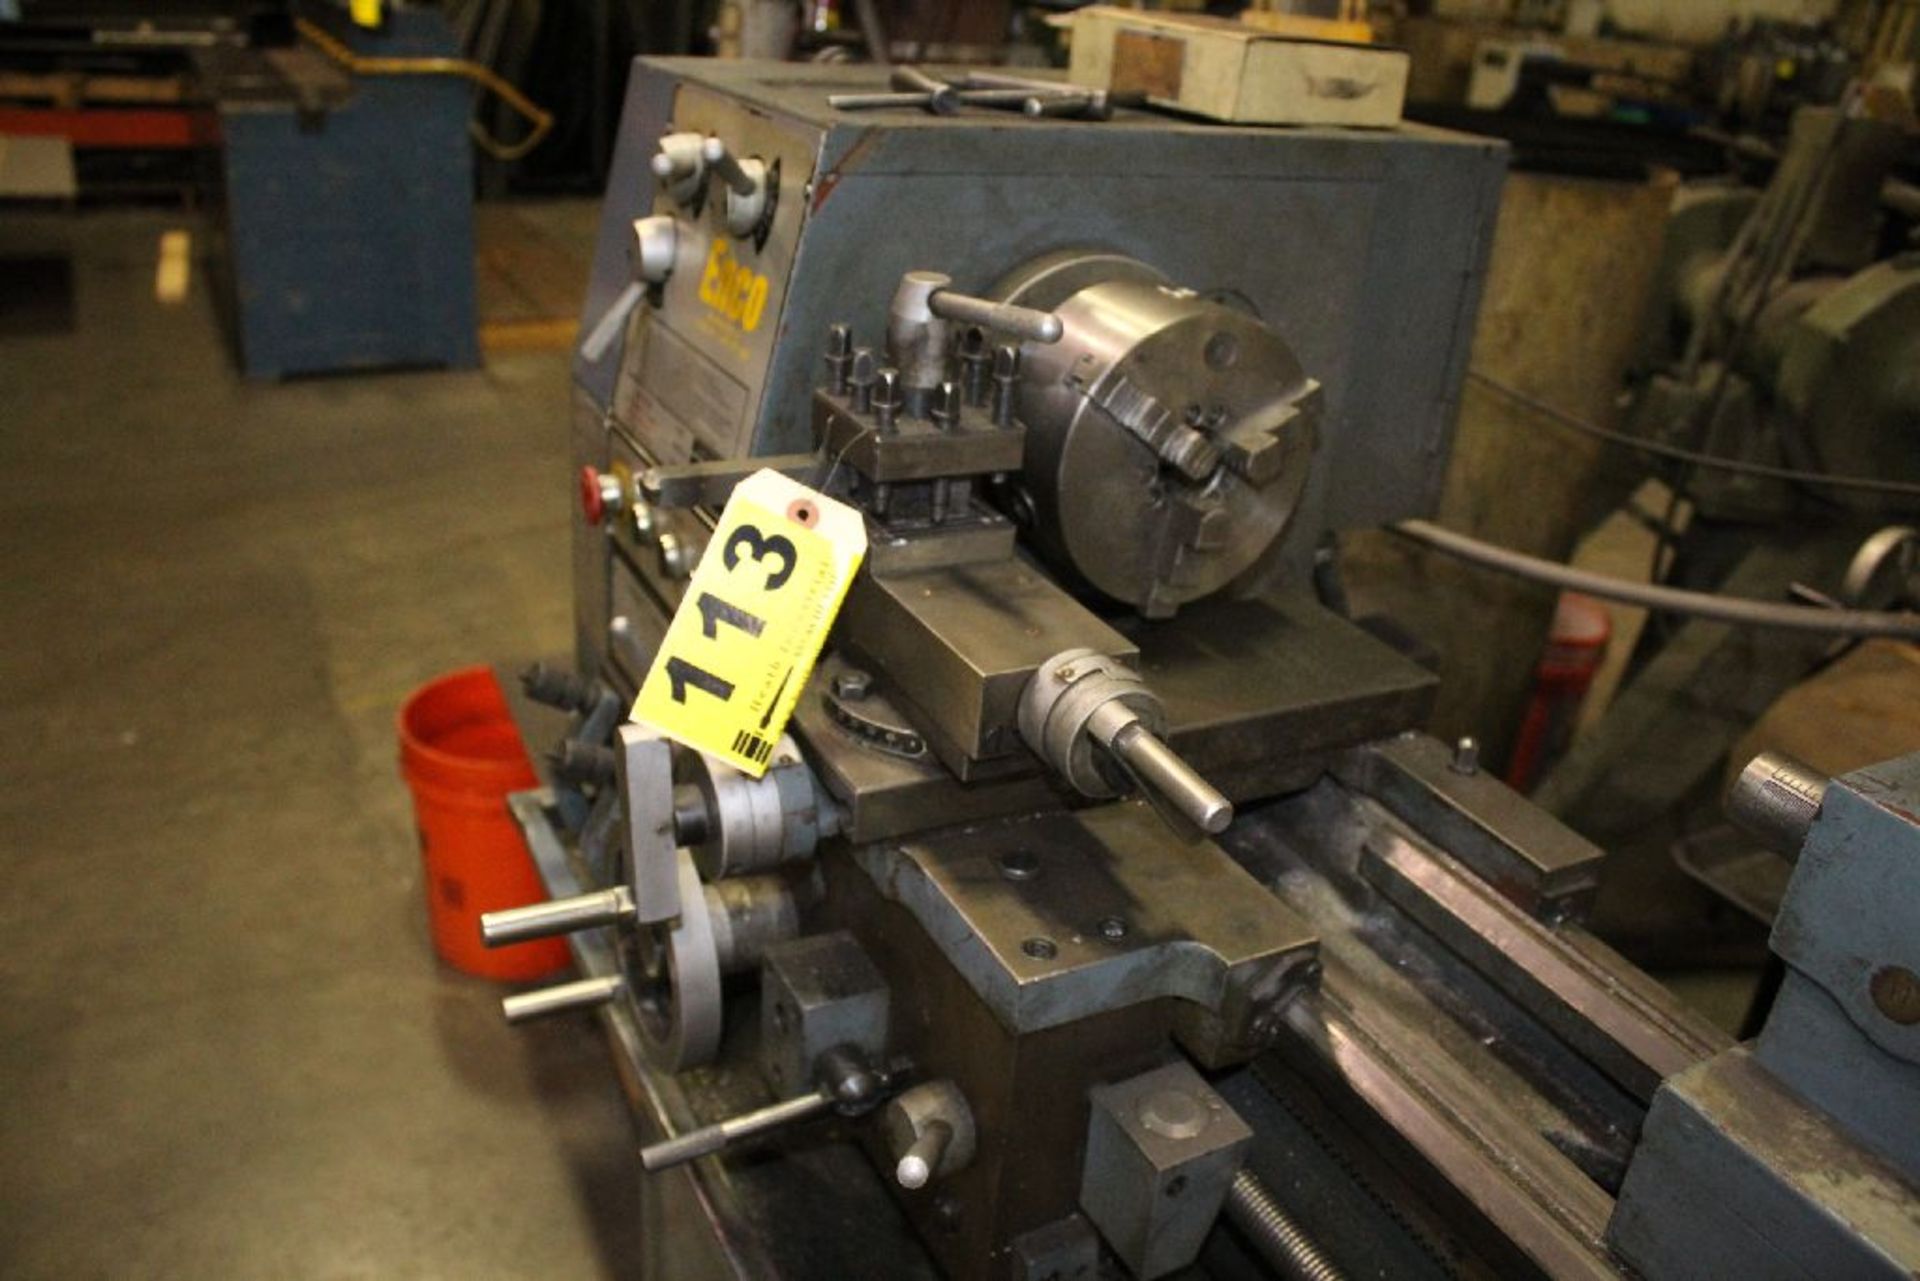 ENCO 12”X36” MODEL 110-2079 TOOLROOM LATHE, S/N 3273620048, 1550 RPM SPINDLE, INCH THREADING, 6” - Image 3 of 6